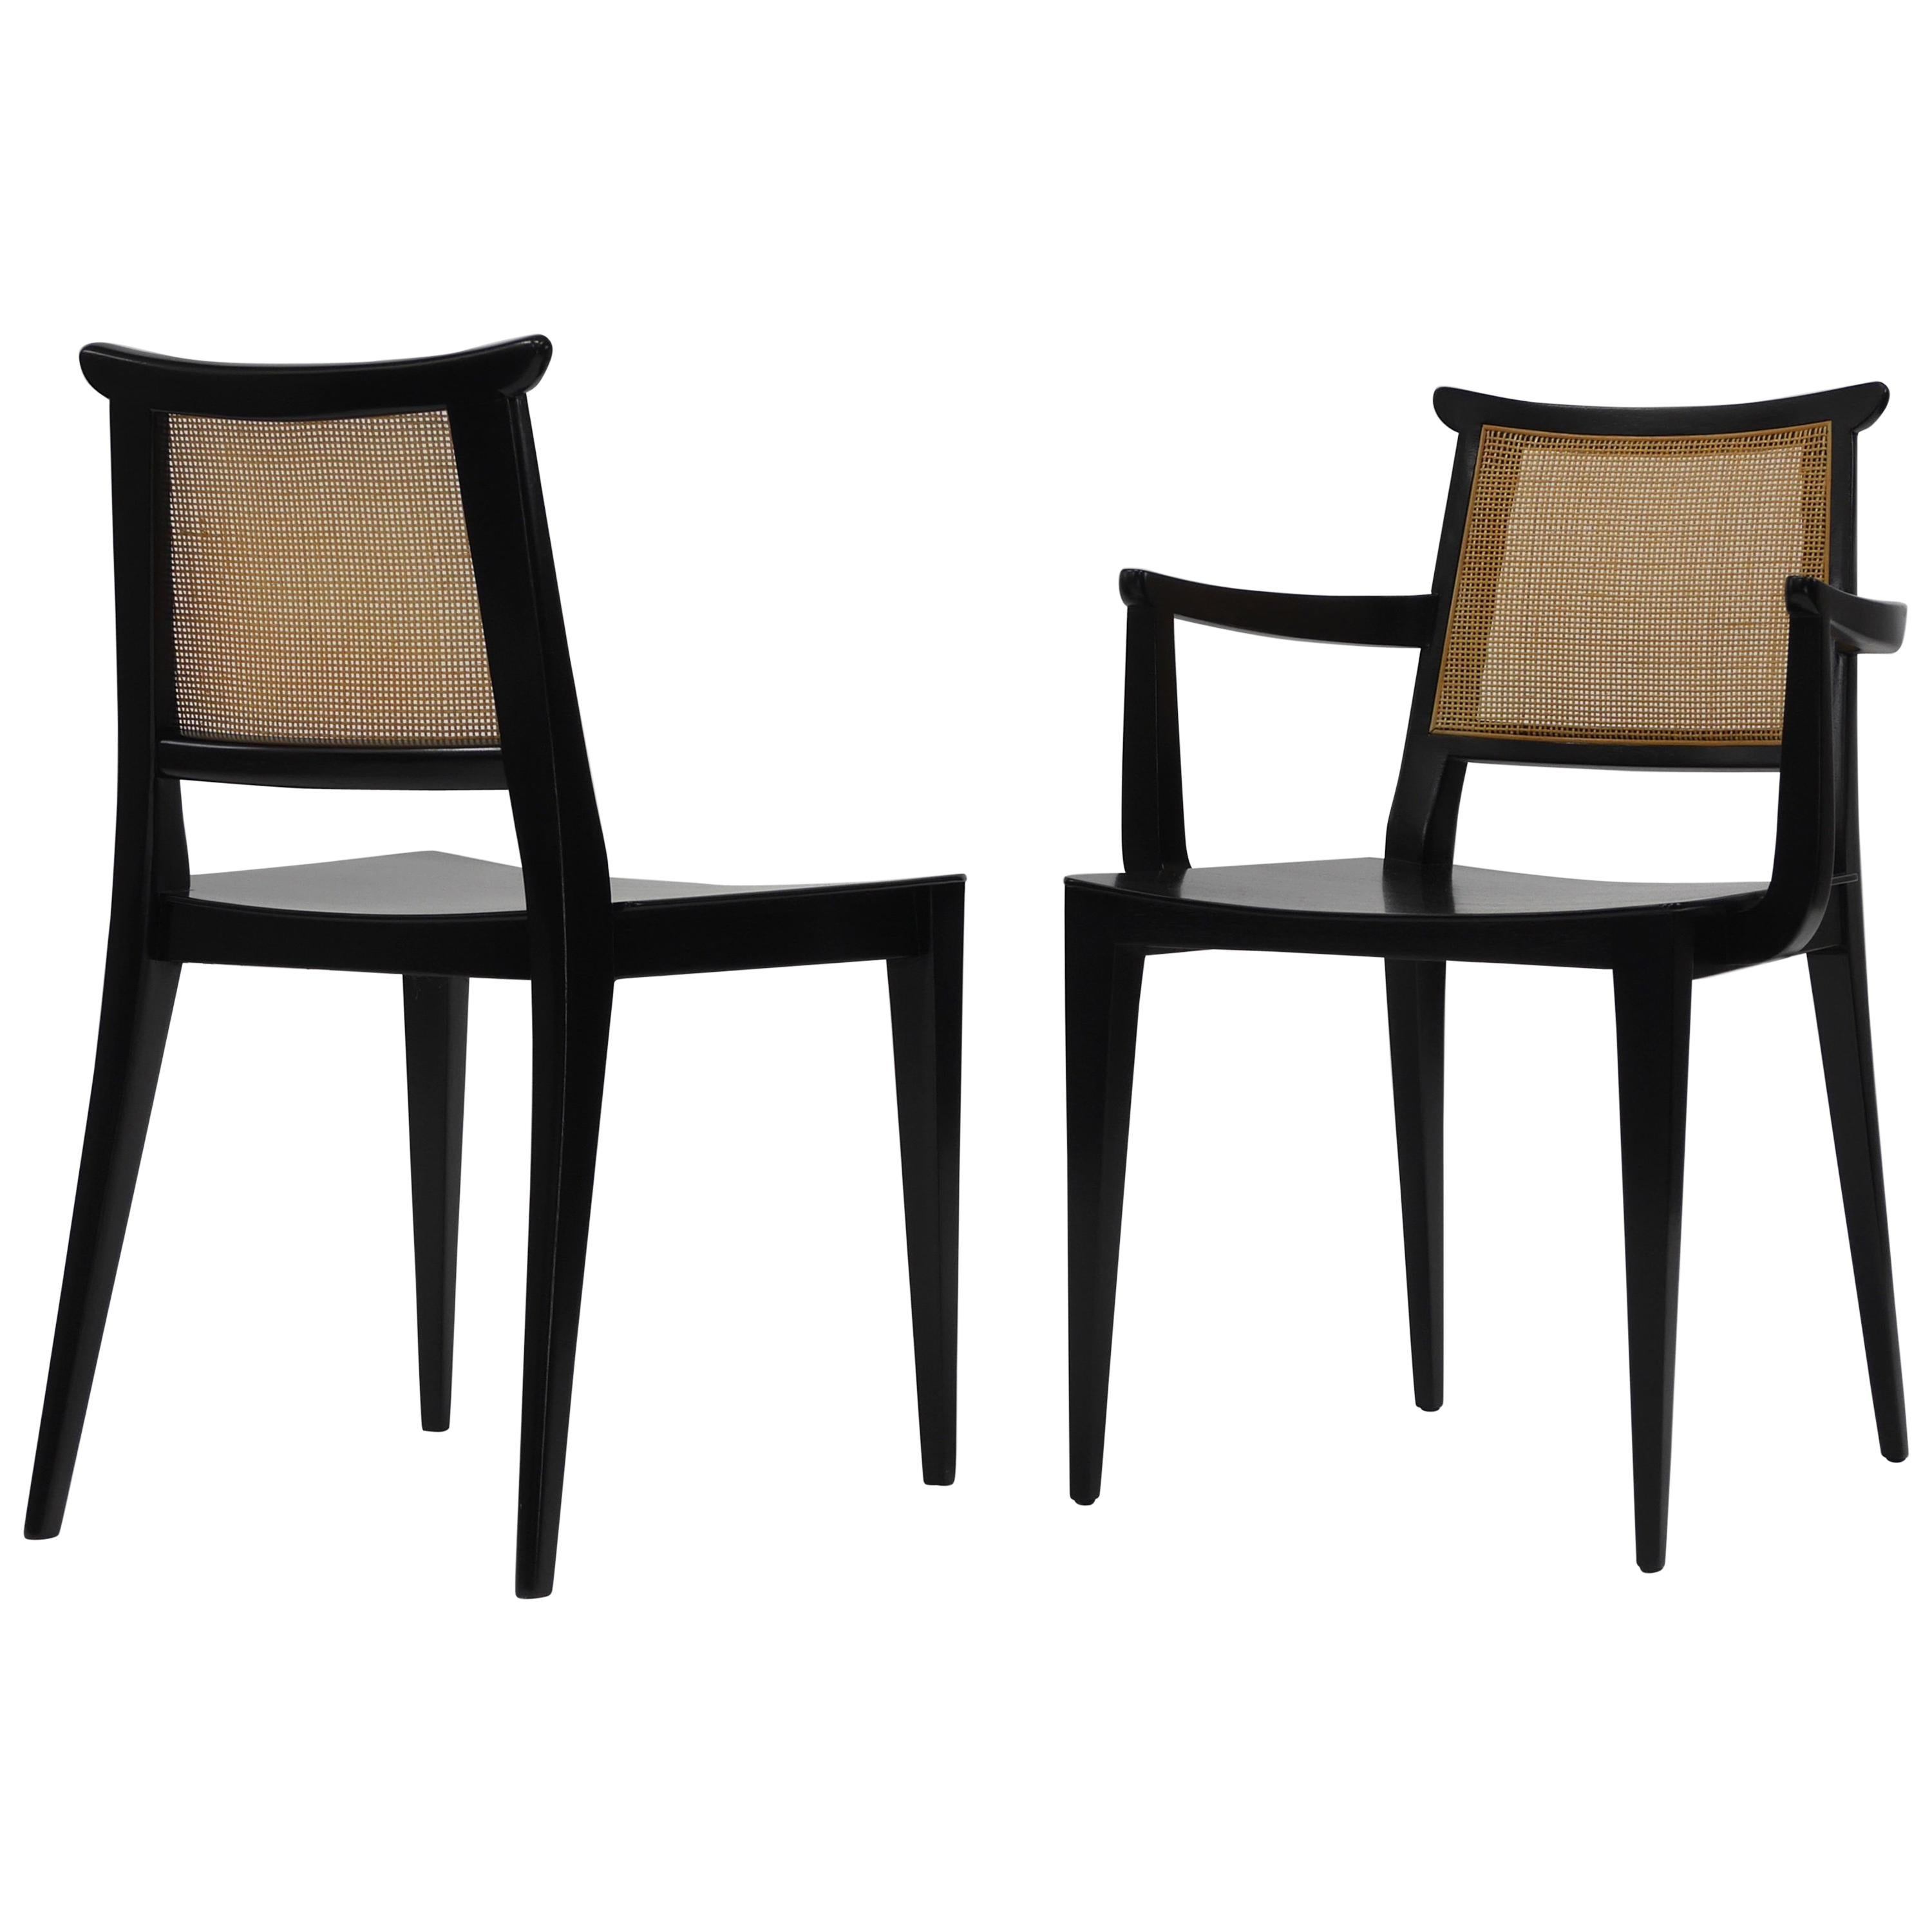 Eight Asian Dining Chairs by Edward Wormley for Dunbar